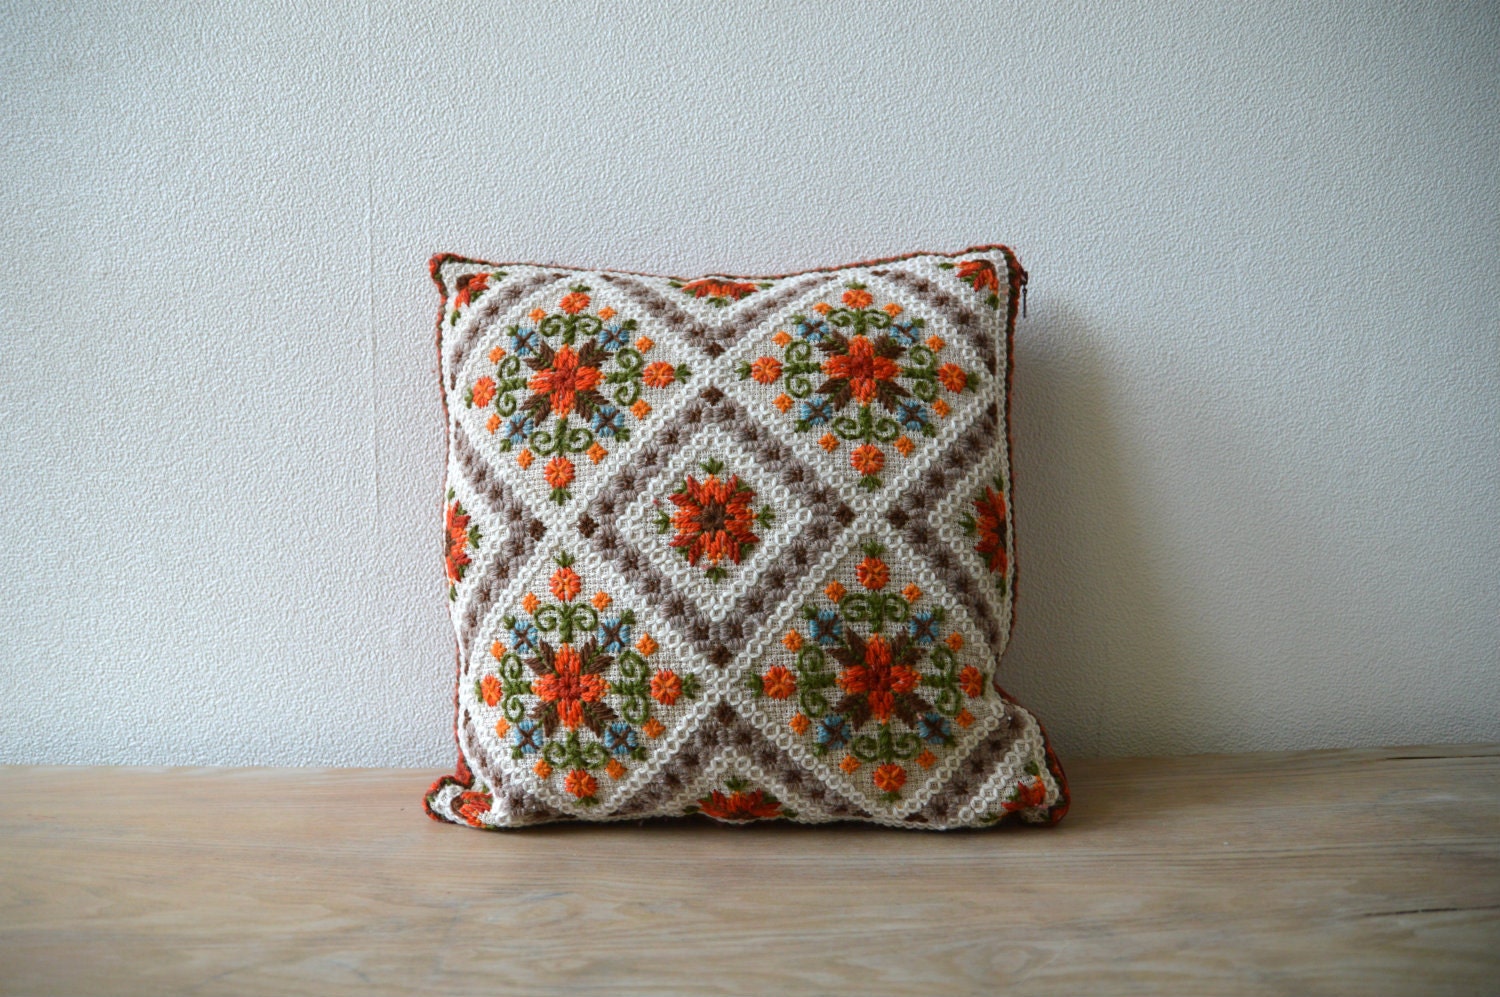 Vintage Embroidered Pillow Cover 14x14 Cross Stiched Pillow